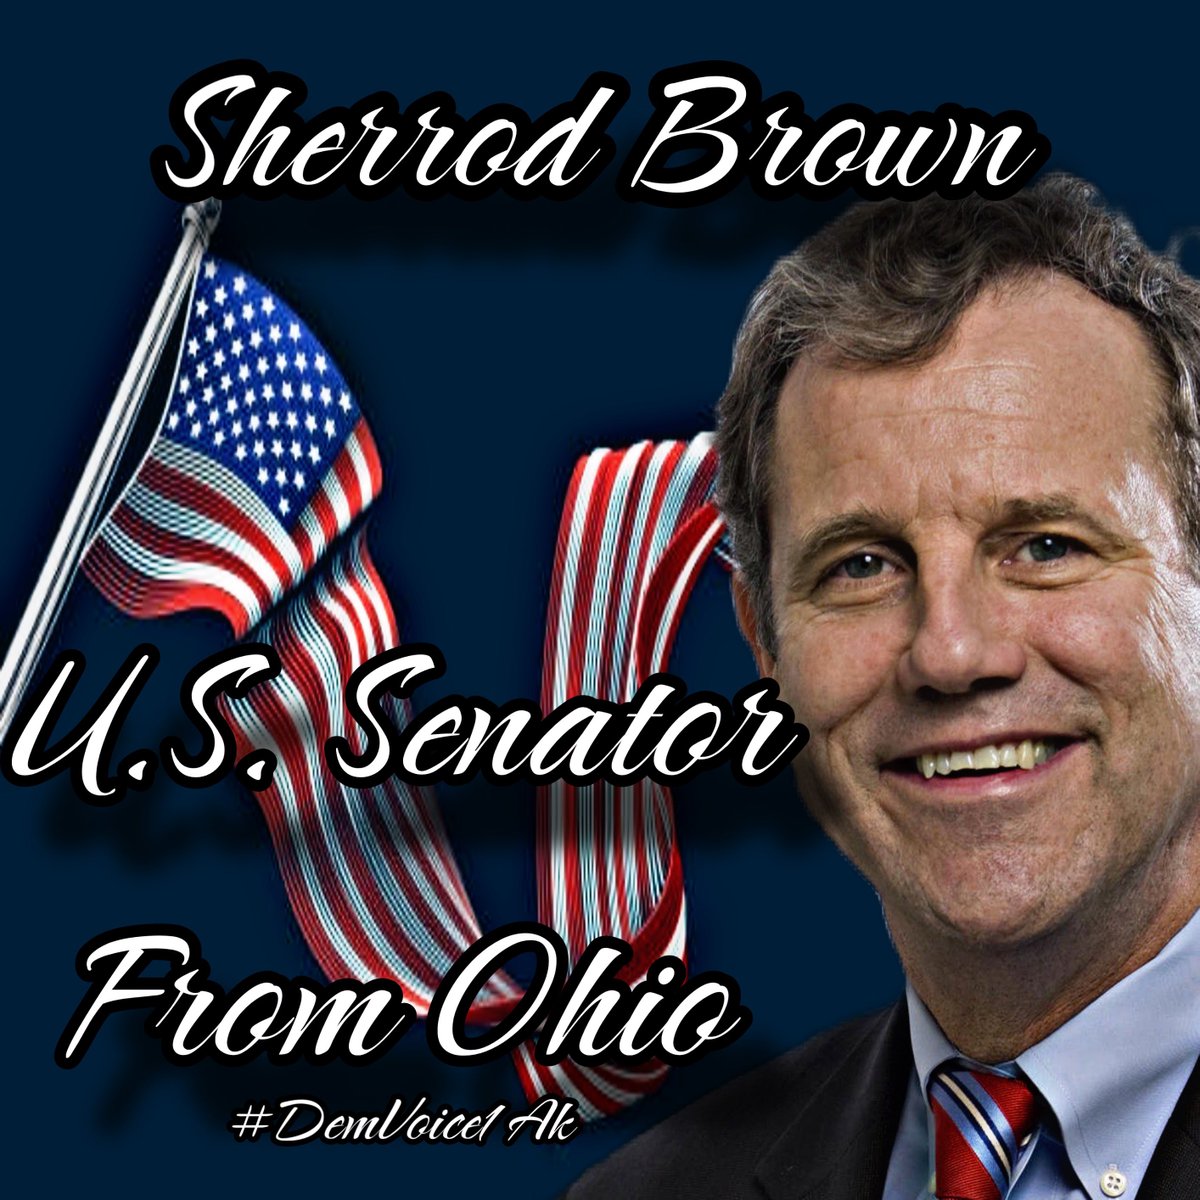 Ohio Senator Sherrod Brown is a vulnerable incumbent. He had popularity in counties like Mahoning and Trumbull; this changed when Trump won both. It makes Trump's endorsement of Bernie Moreno a serious threat to Brown. We must ensure @SherrodBrown’s re-election. #DemVoice1